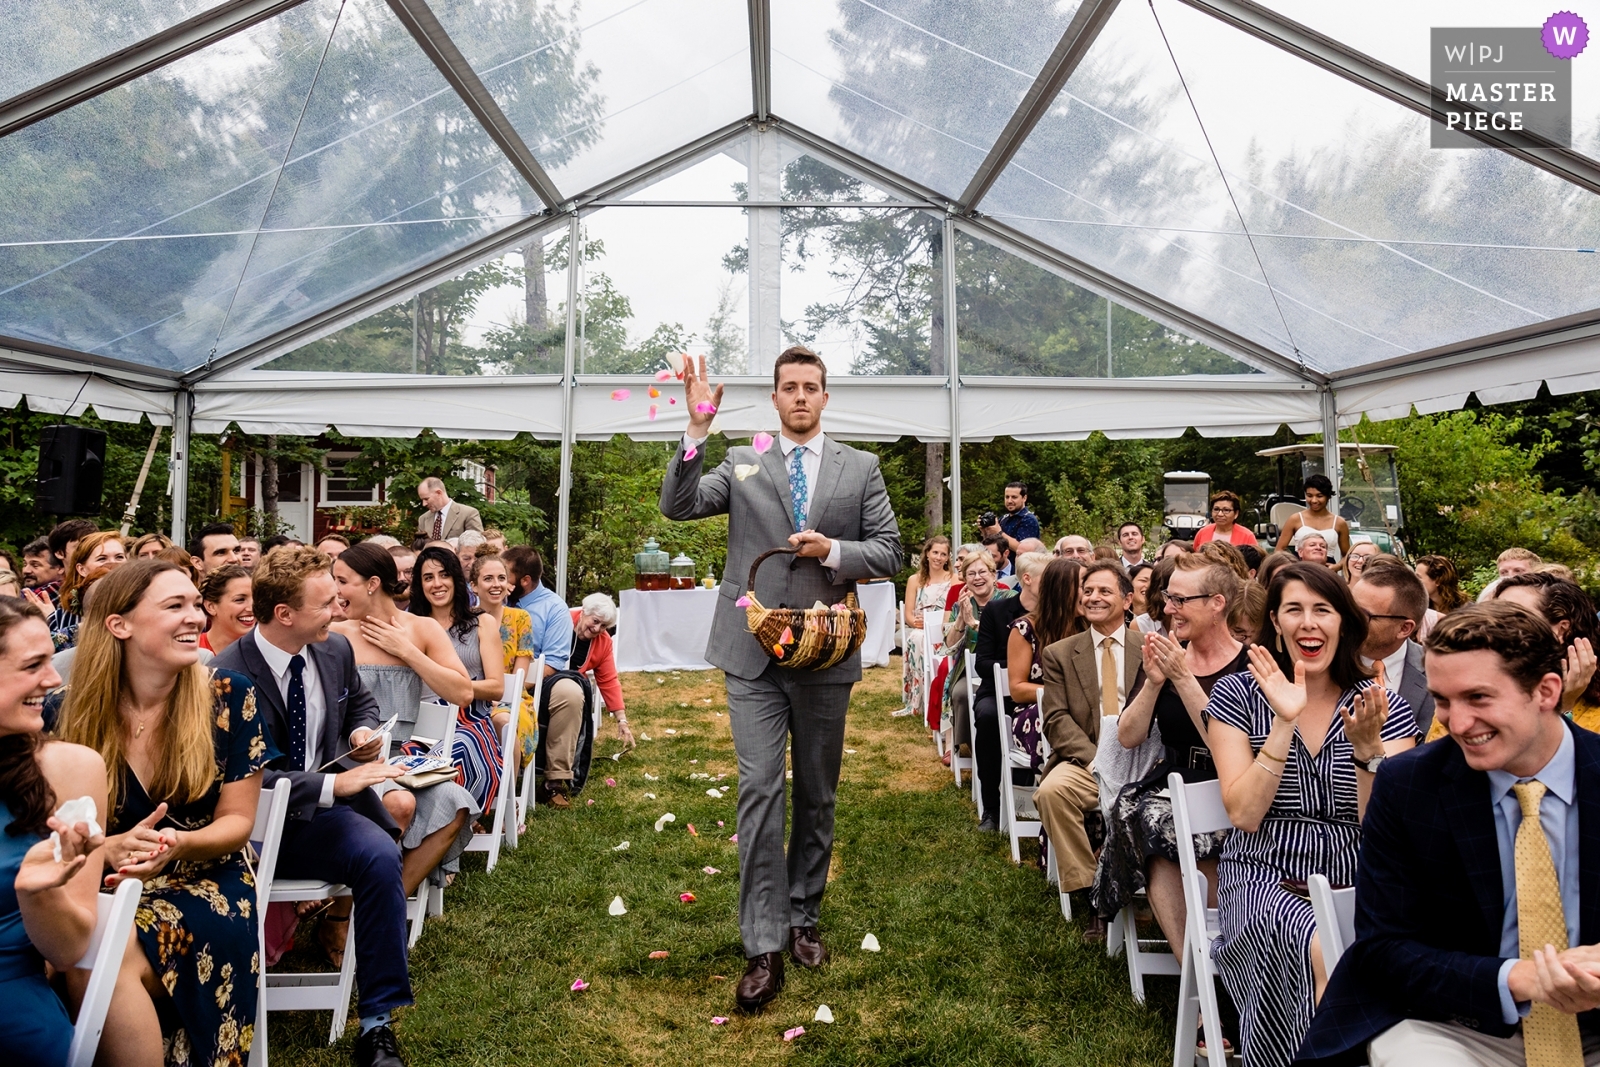 Award Winning New Hampshire Wedding Photographer my image from a Trenton Maine wedding where the flower MAN tossed petals down the aisle to the delight of the guests!